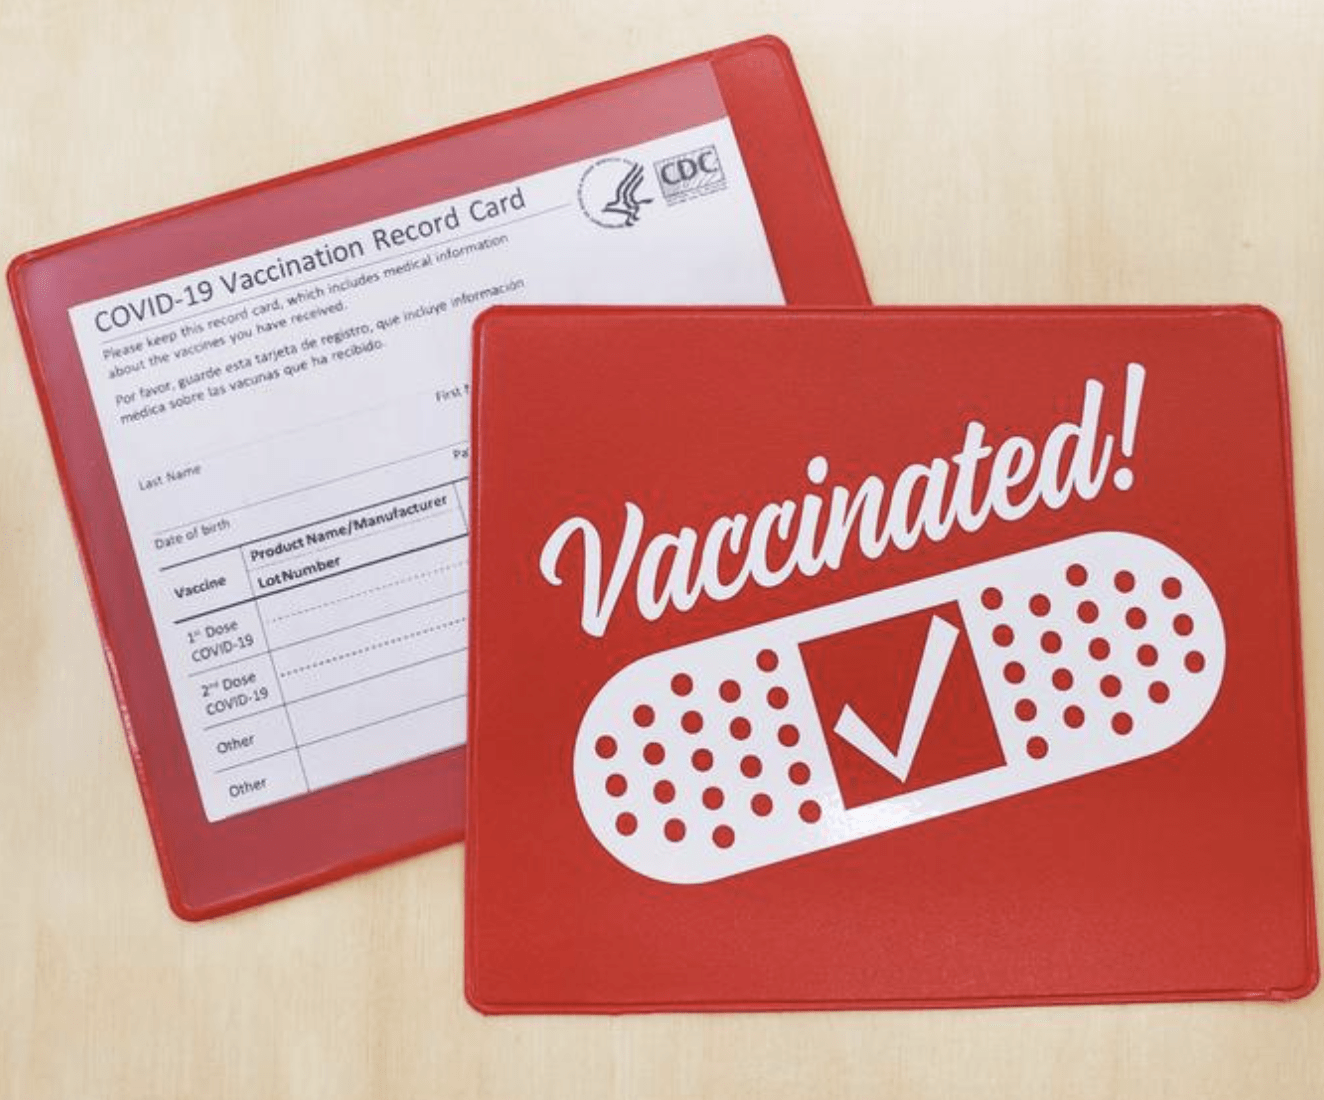 2PCS Vaccine Card Protector CDC Vaccine Card Holder 4.5 x 3.5 IN Upgraded Vaccination Card Protector Plastic Sleeve with Waterproof Type Resealable Zip Immunization Card Covid Vaccine Card Holder 